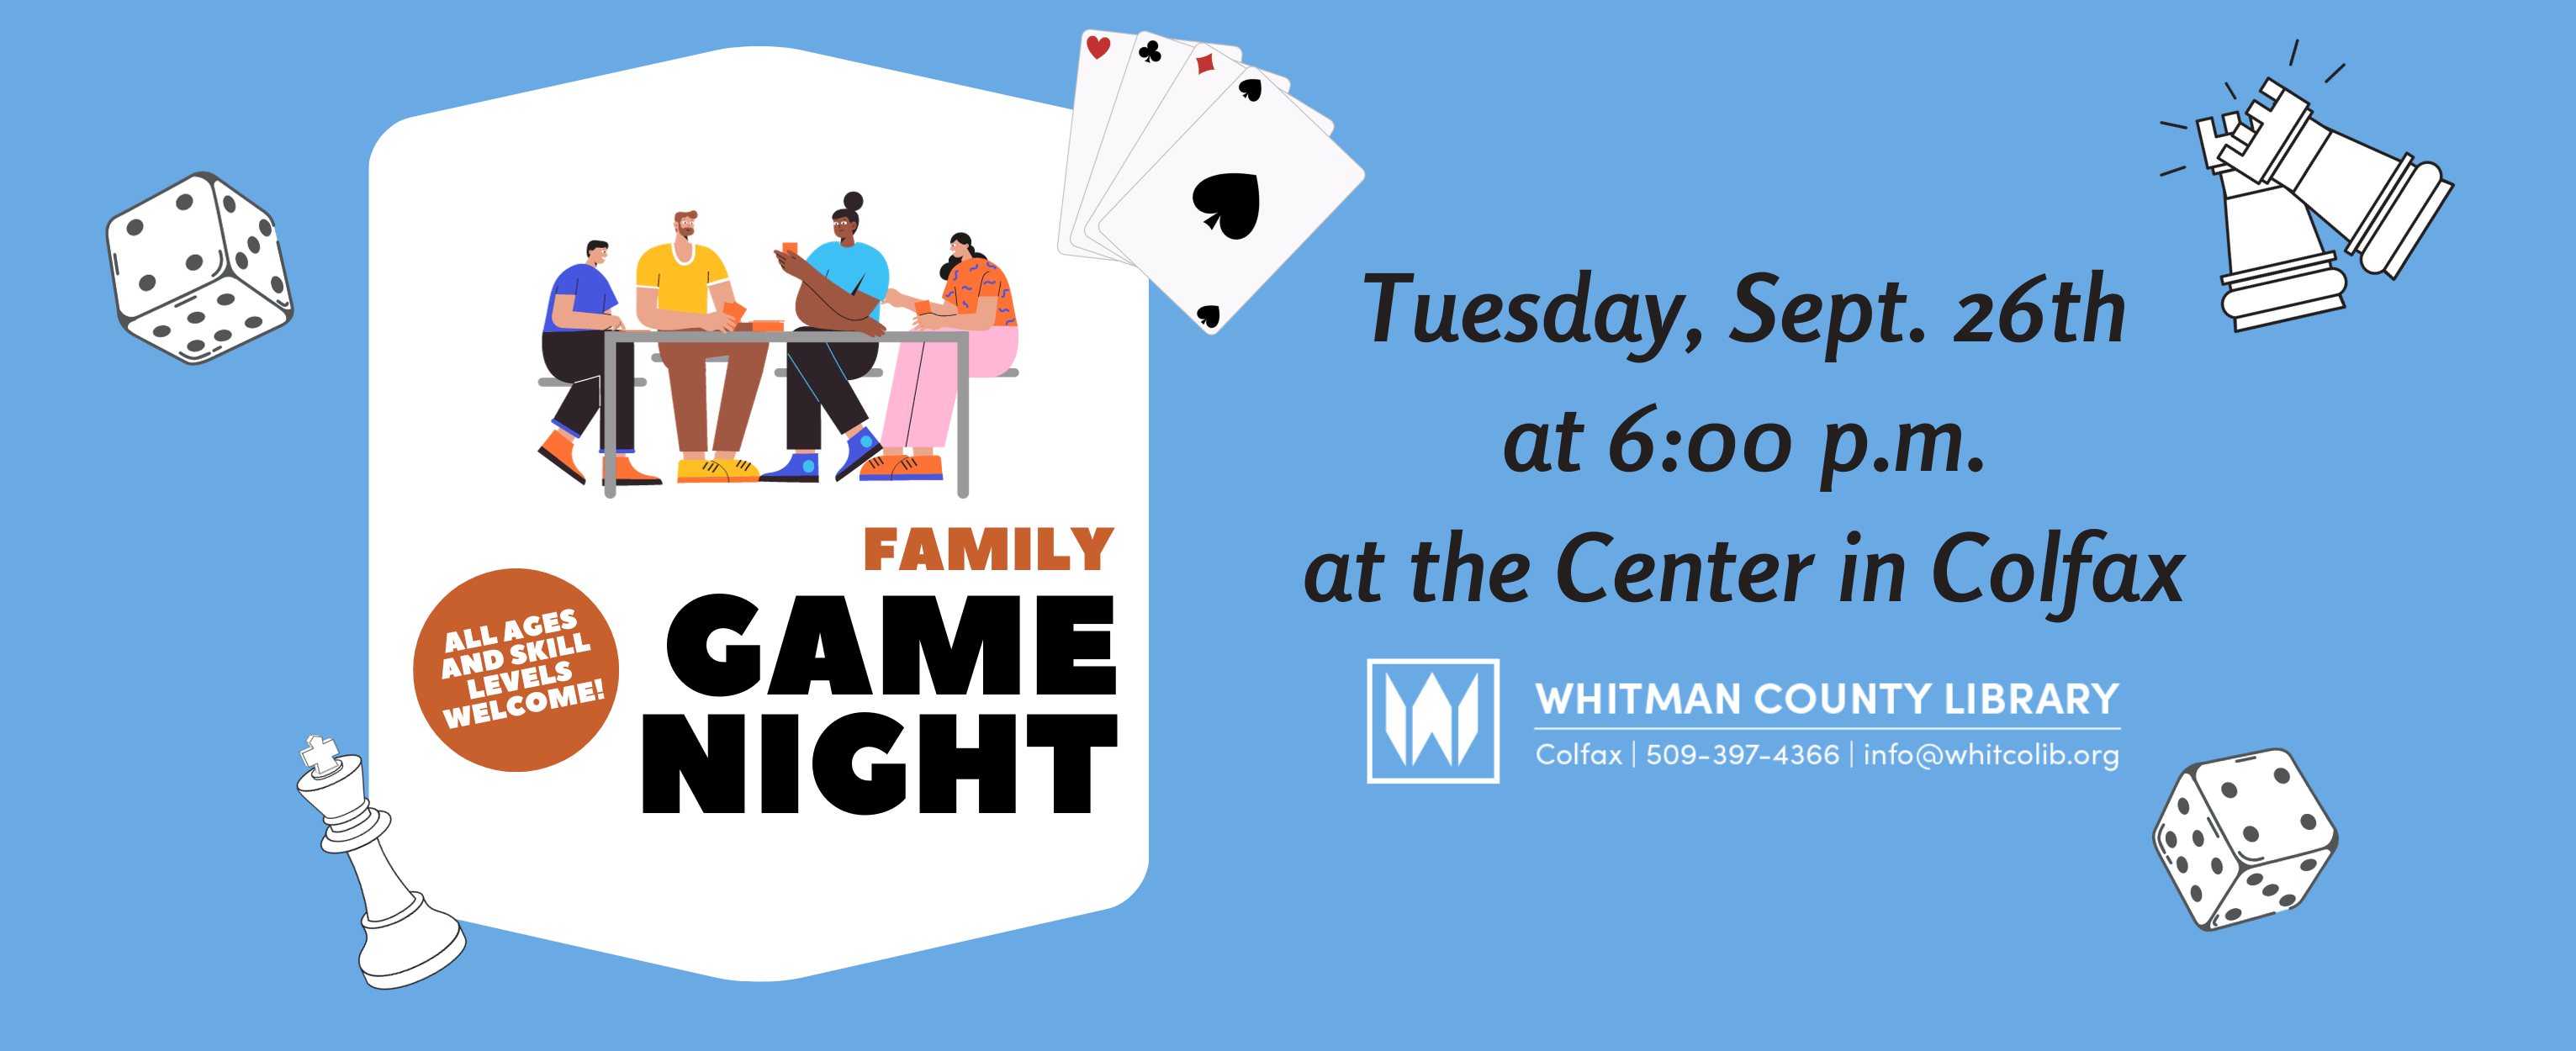 Family Game Night on Tuesday, Sept. 26 at 6:00 PM in the Center. 